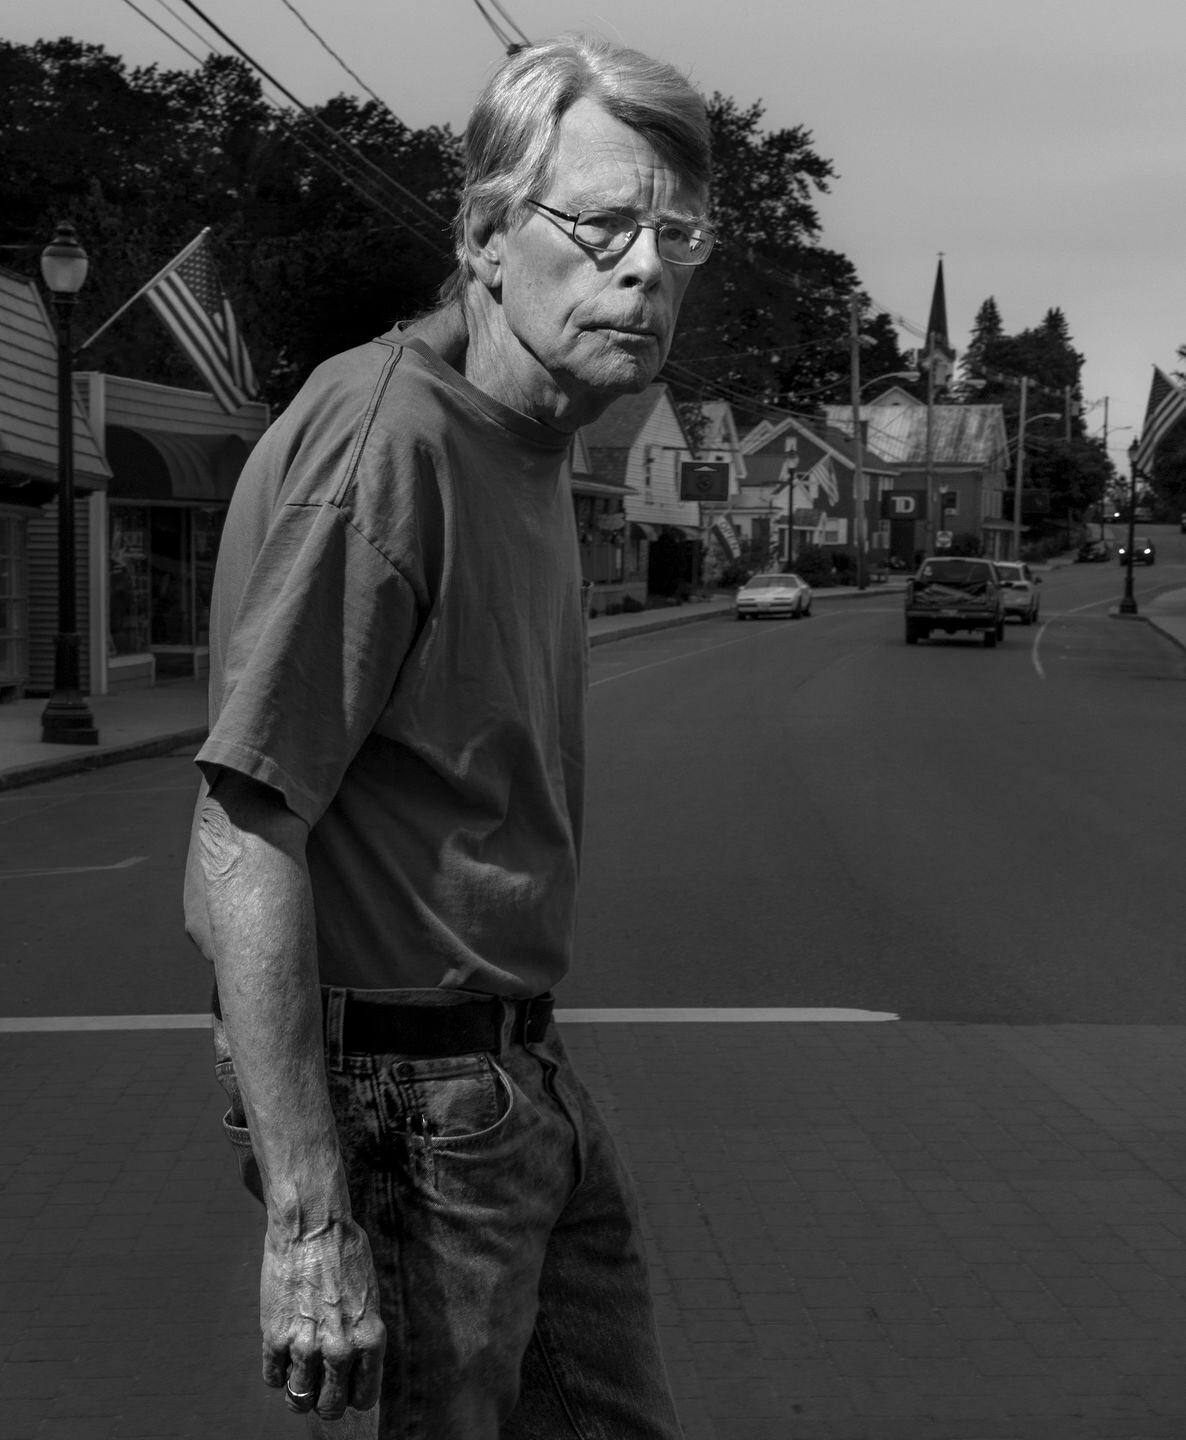 Stephen King: 'I was very ill, on different medications, and I